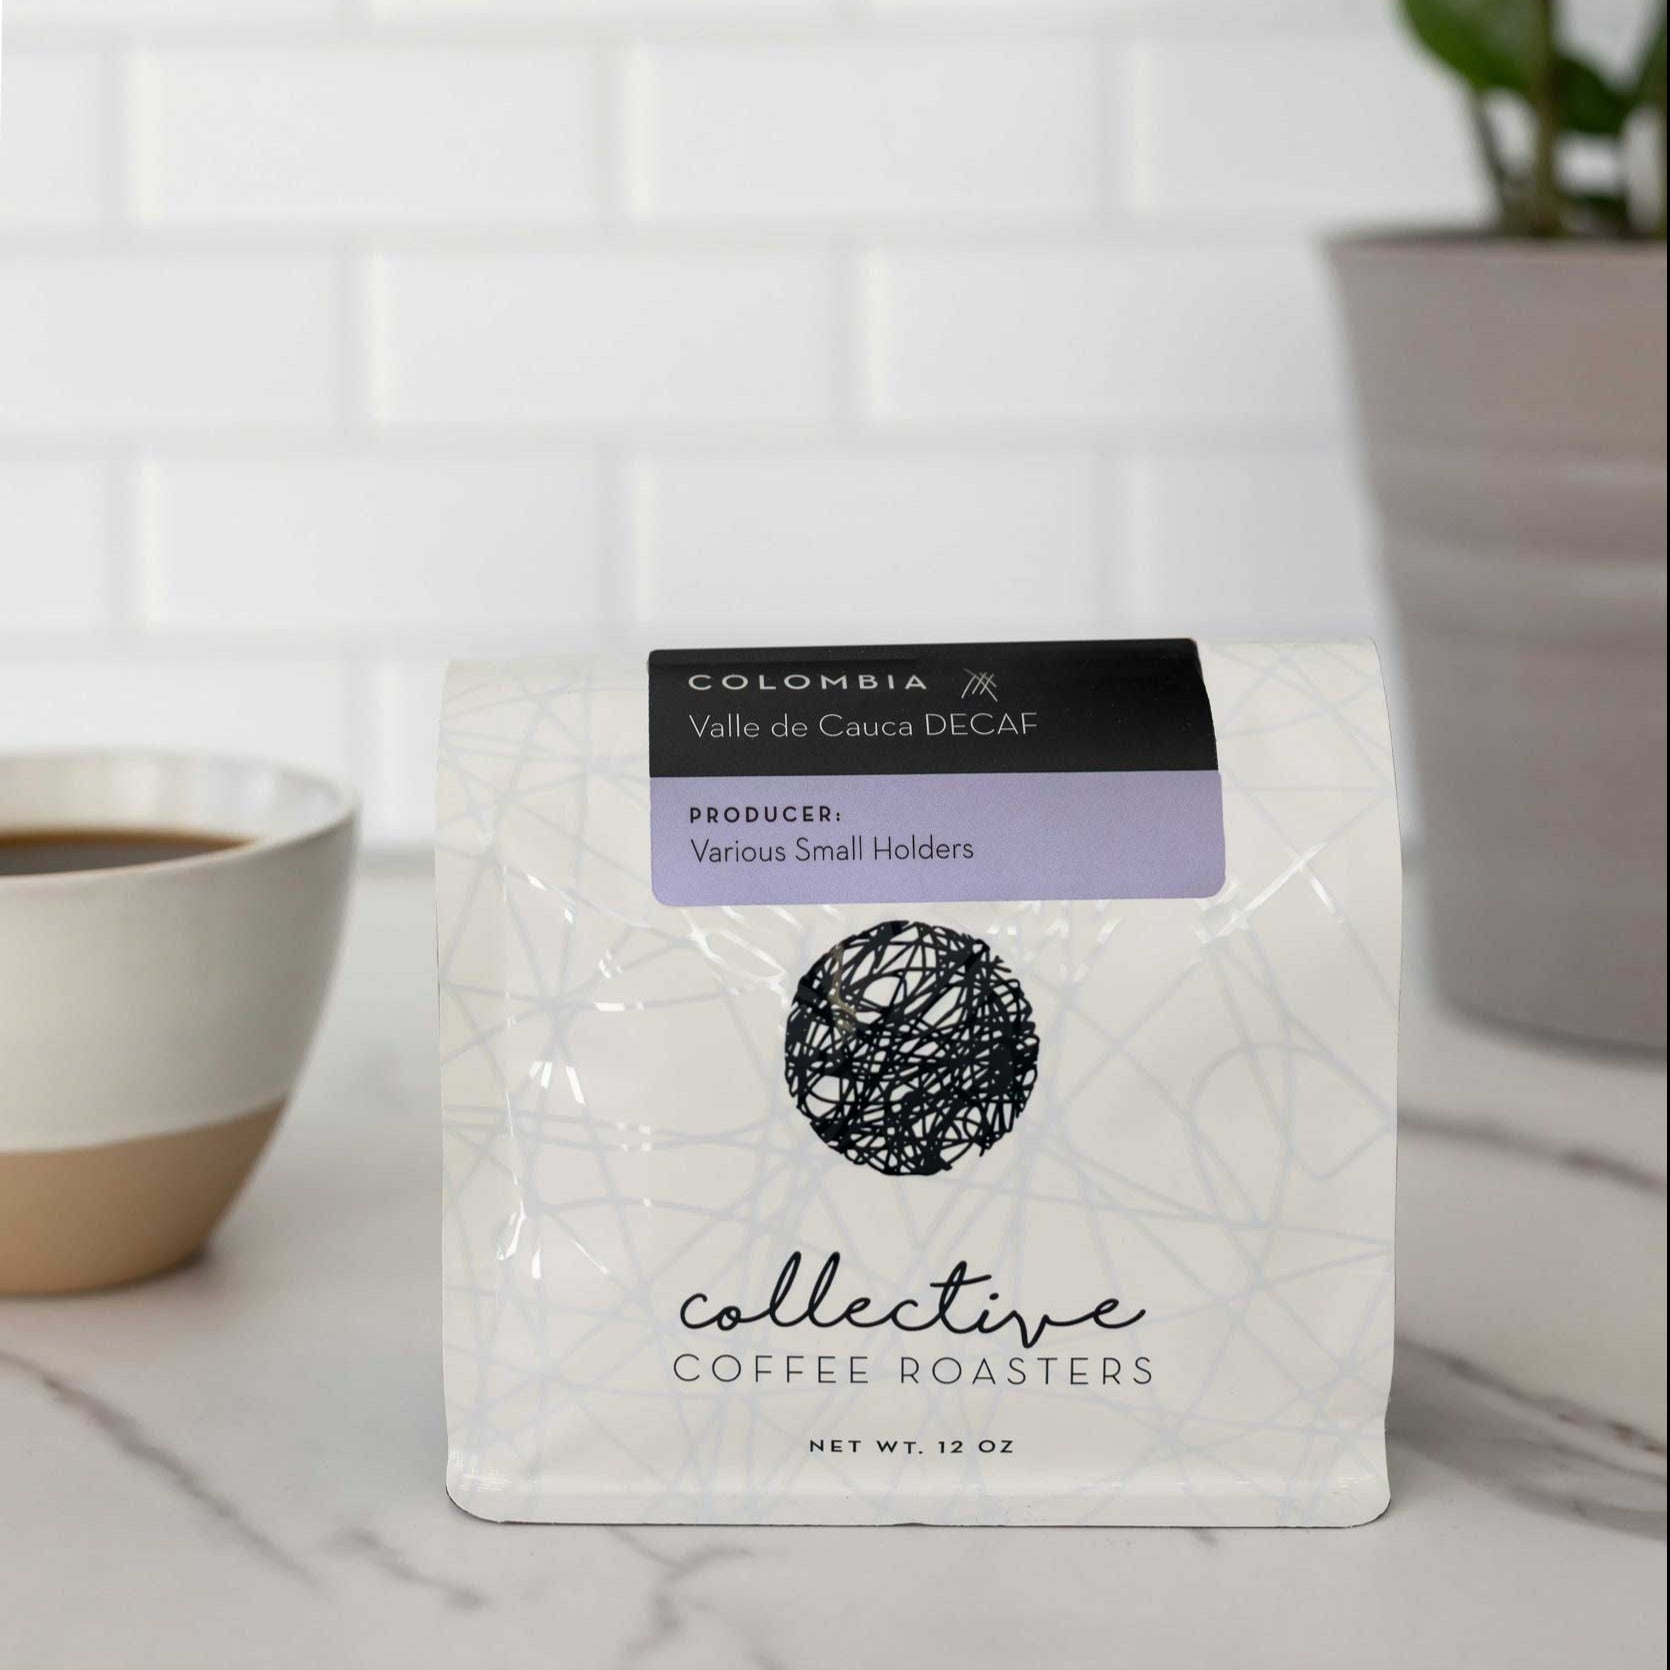 Colombia Valle del Cauca DecafColombia Valle del Cauca DecafCollective Coffee Roasters
Process: EA Sugarcane decaffeination
Elevation: 1750 MASL

Calm down with this decaf coffee from Valle del Cauca, Colombia. This beautiful coffee performs well for 